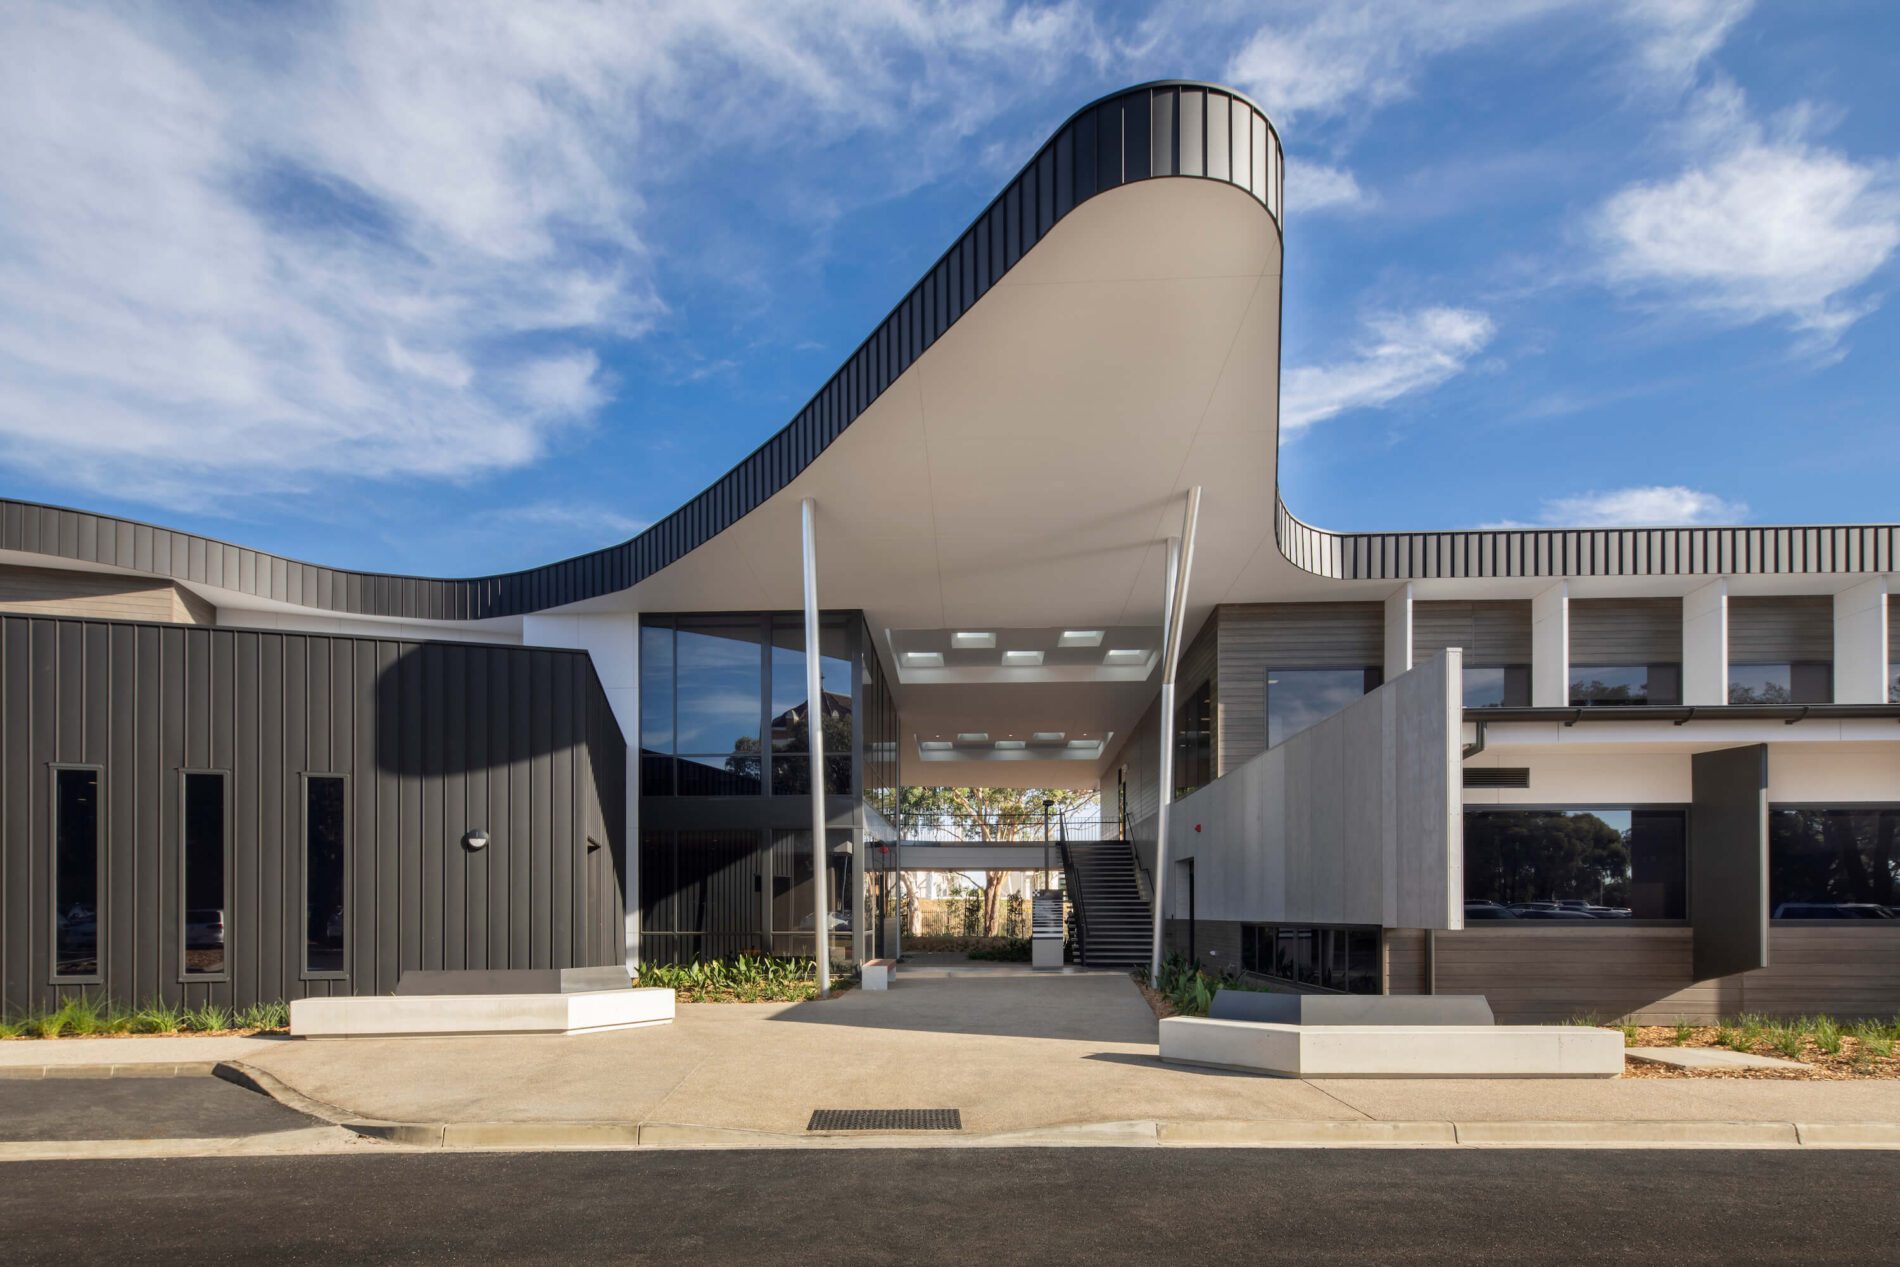 Large canopy juts from new Victoria Police Academy facility upgrade